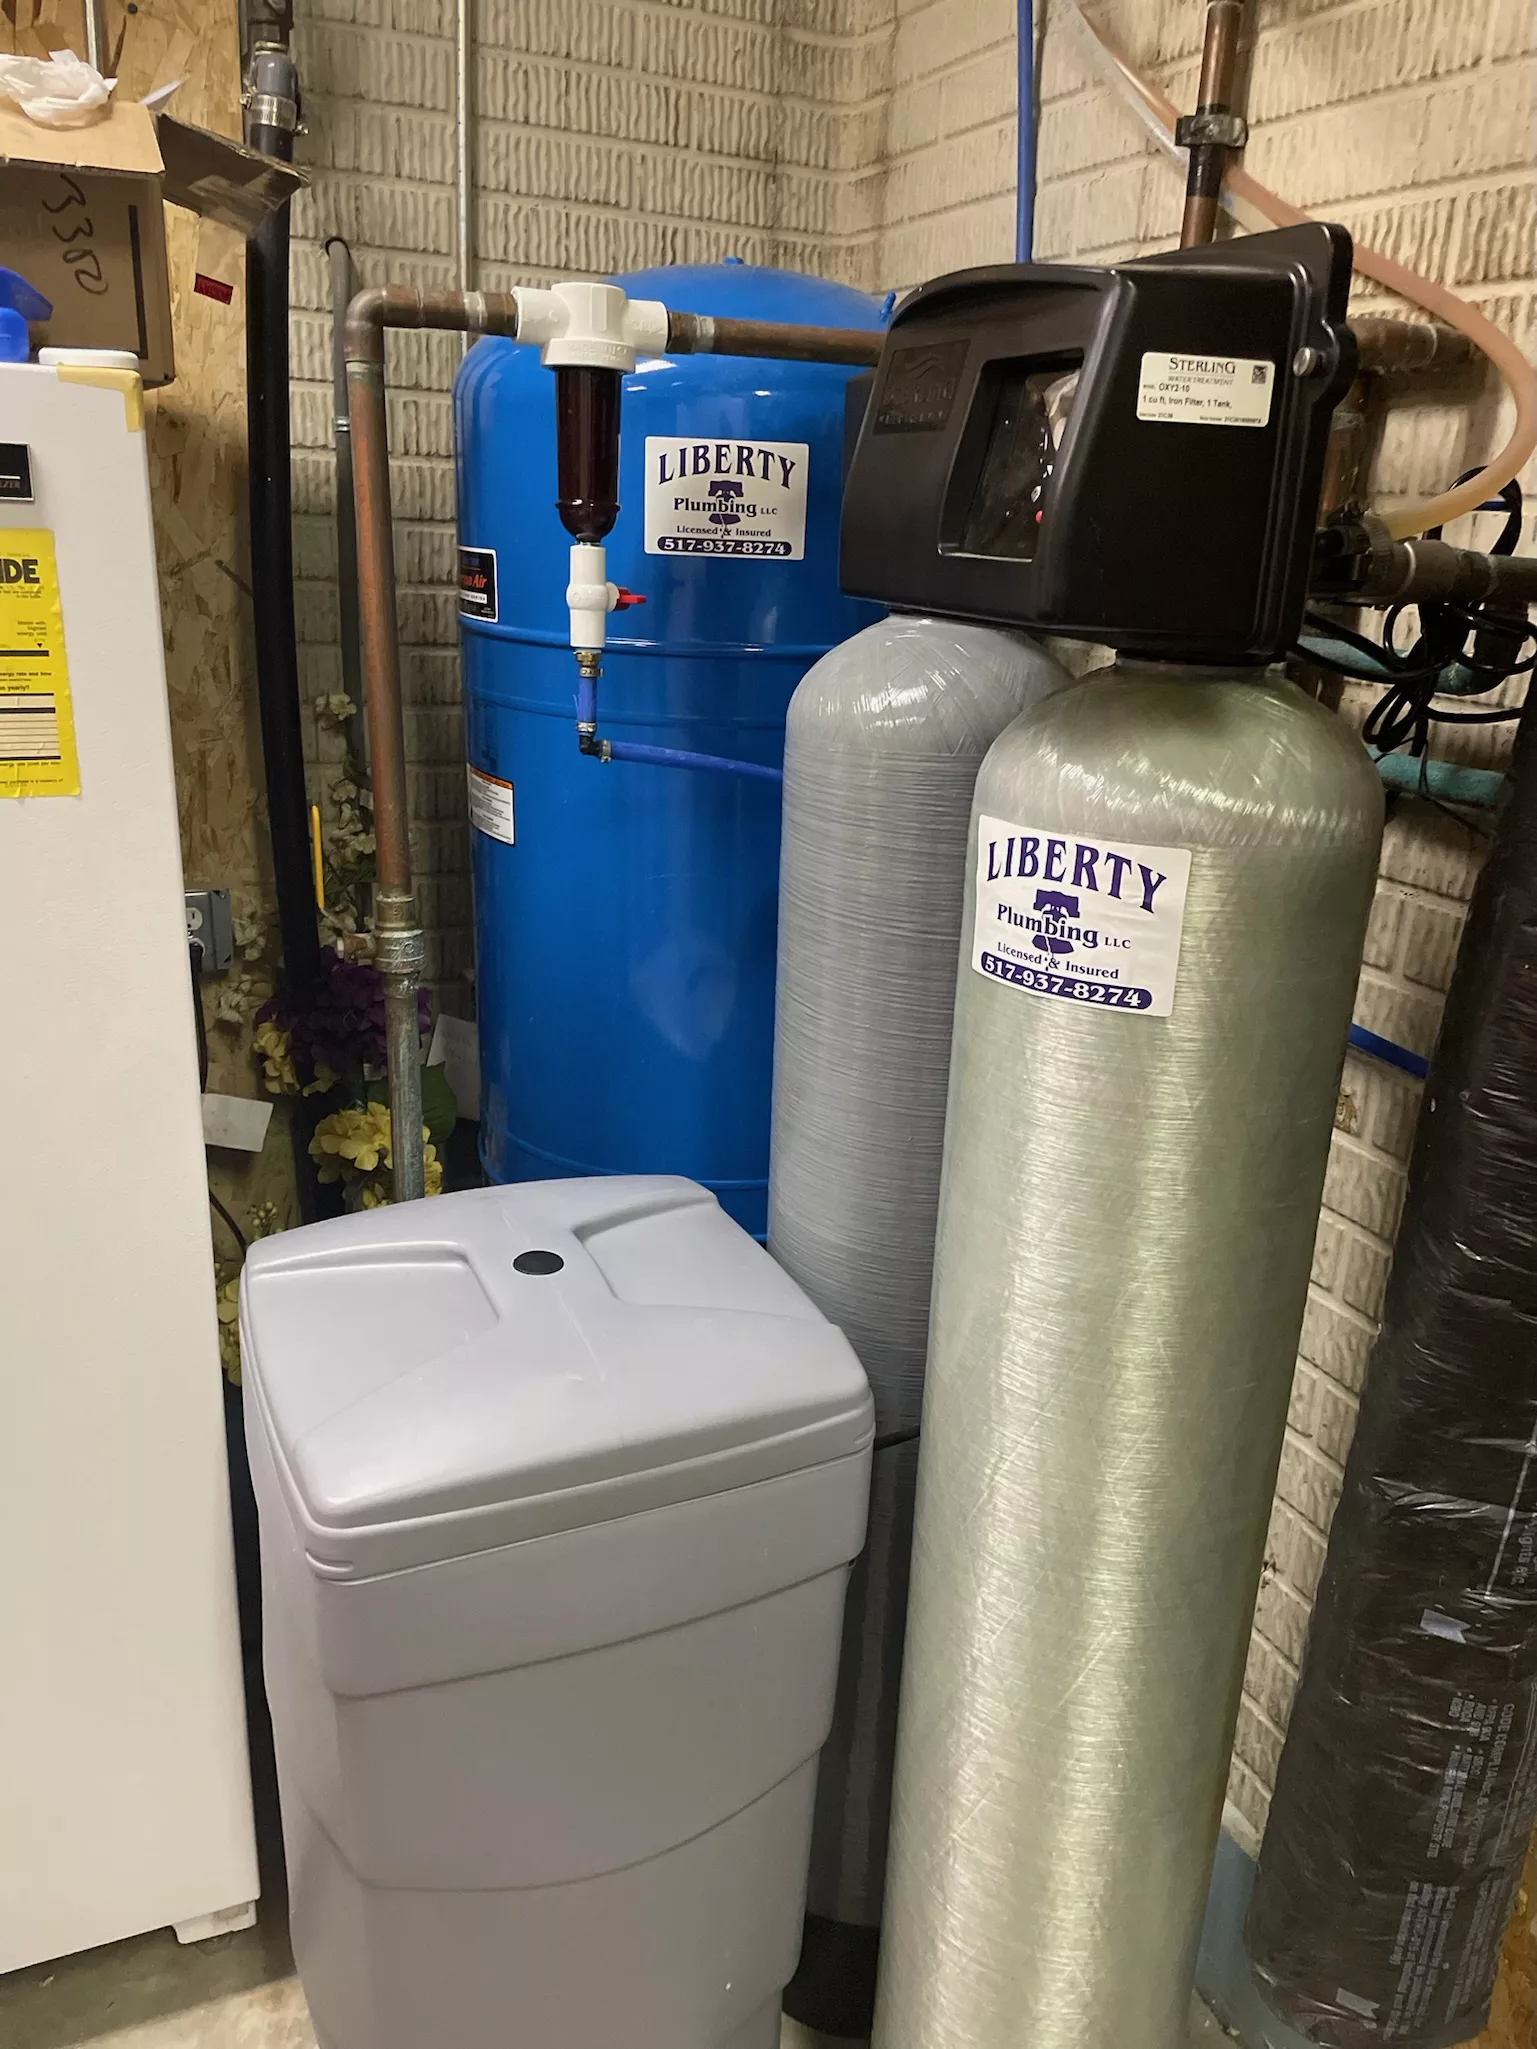 Liberty Plumbing water softener, iron trap, 86 gallon well tank and blow down filter